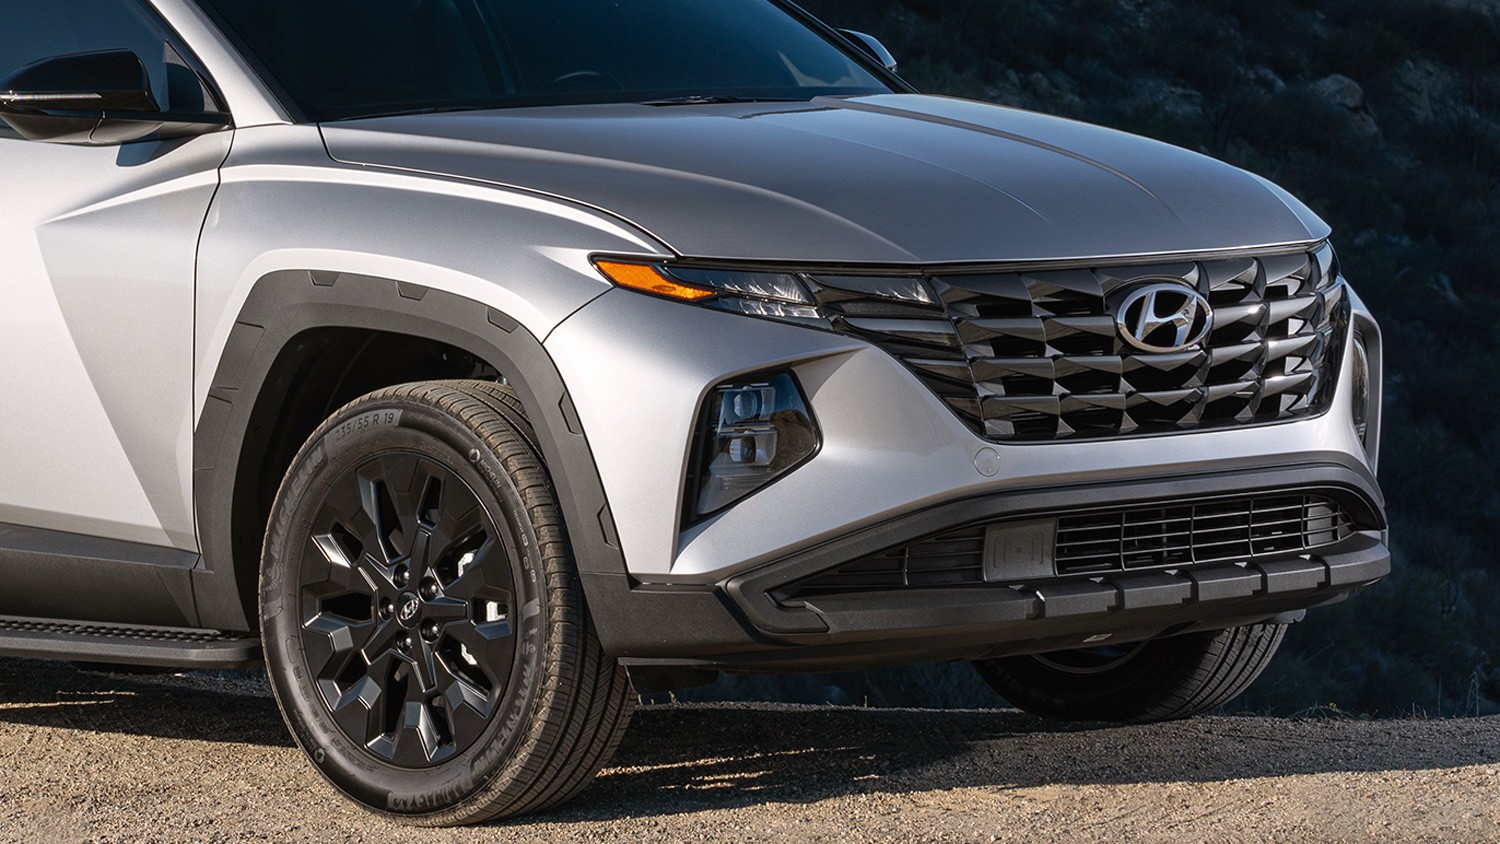 Rugged-Looking 2022 Hyundai Tucson XRT Is All Show With No Extra